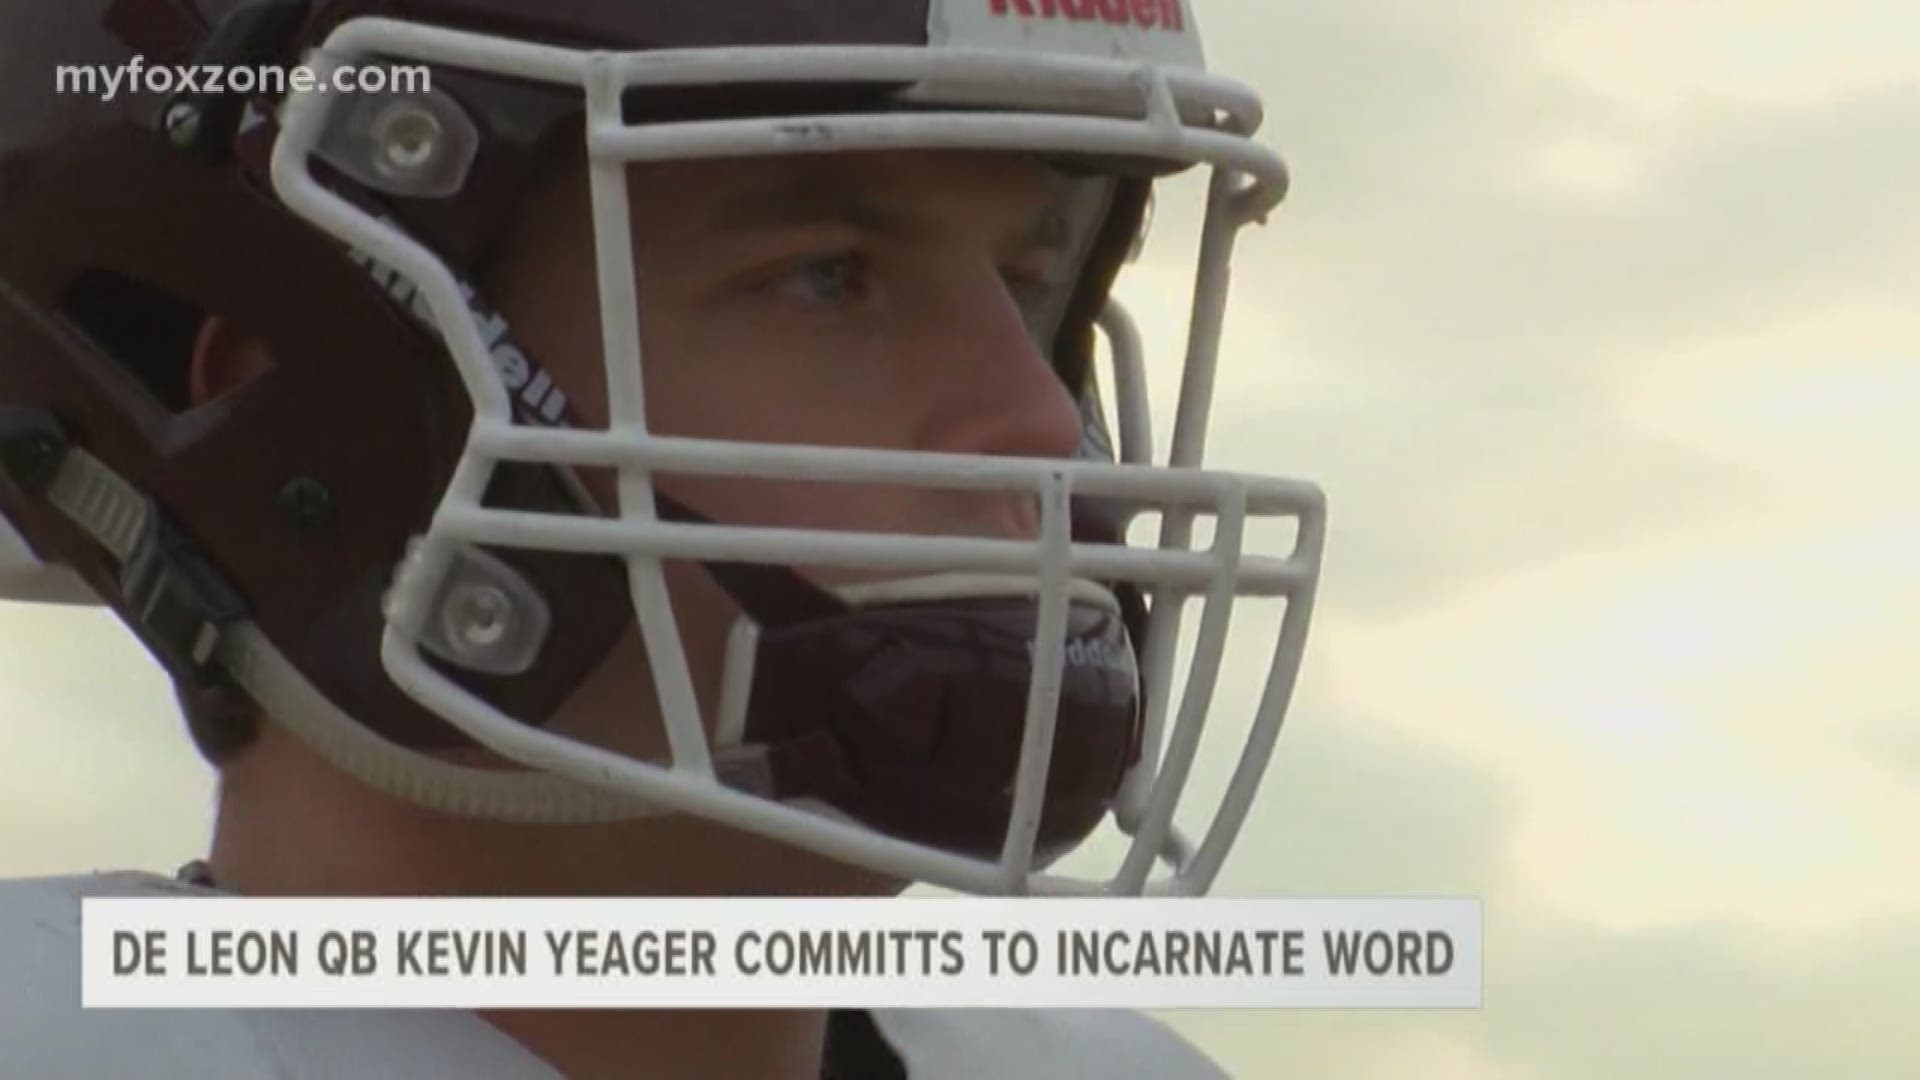 De Leon star QB Kevin Yeager announced his intent to commit to the University of Incarnate Word. He'll play football on a full ride scholarship.